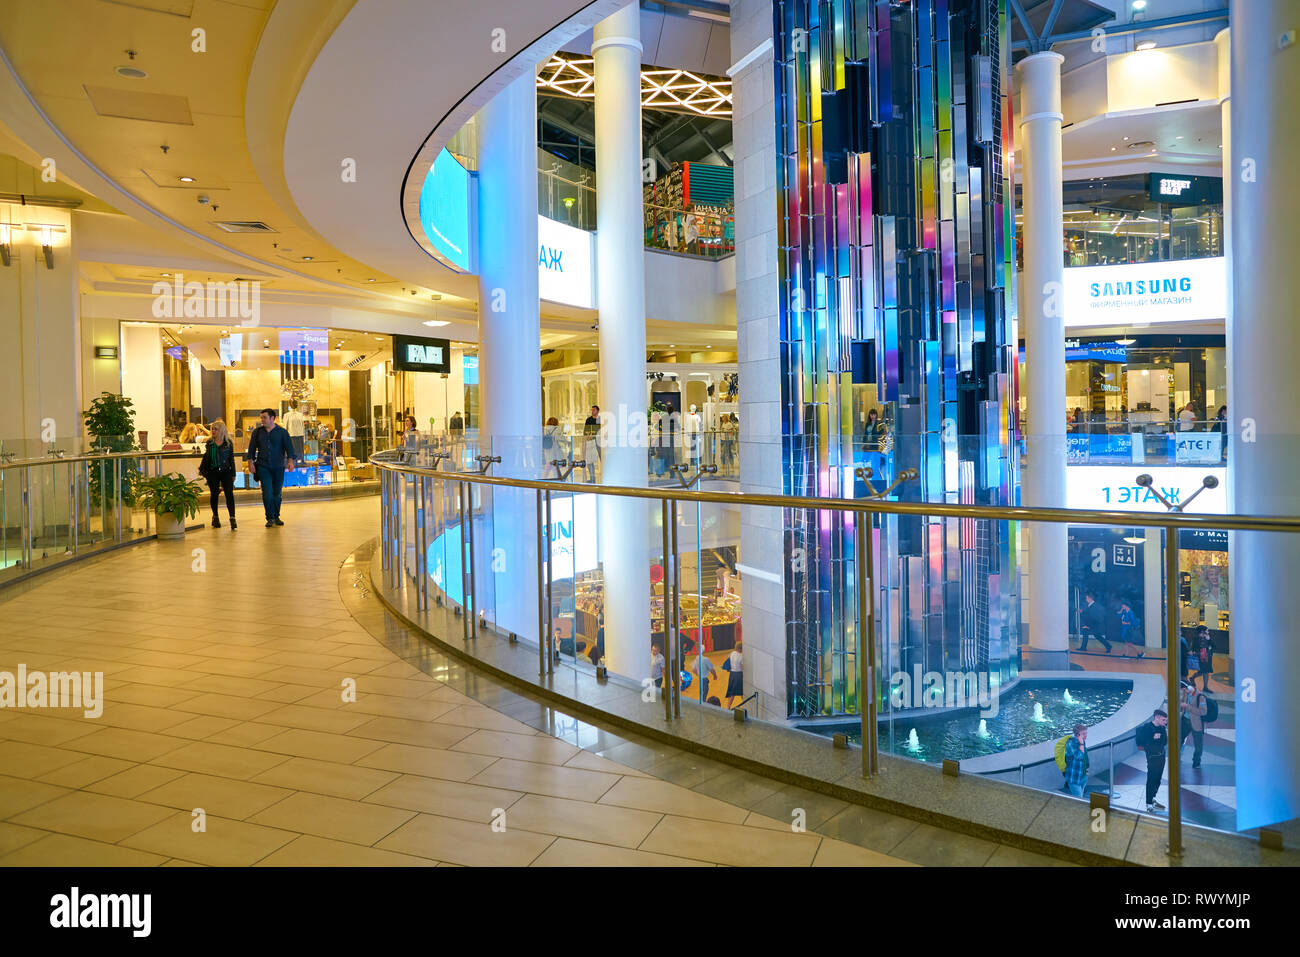 MOSCOW, RUSSIA - CIRCA SEPTEMBER, 2018: interior shot of Atrium shopping center in Moscow, Russia. Stock Photo